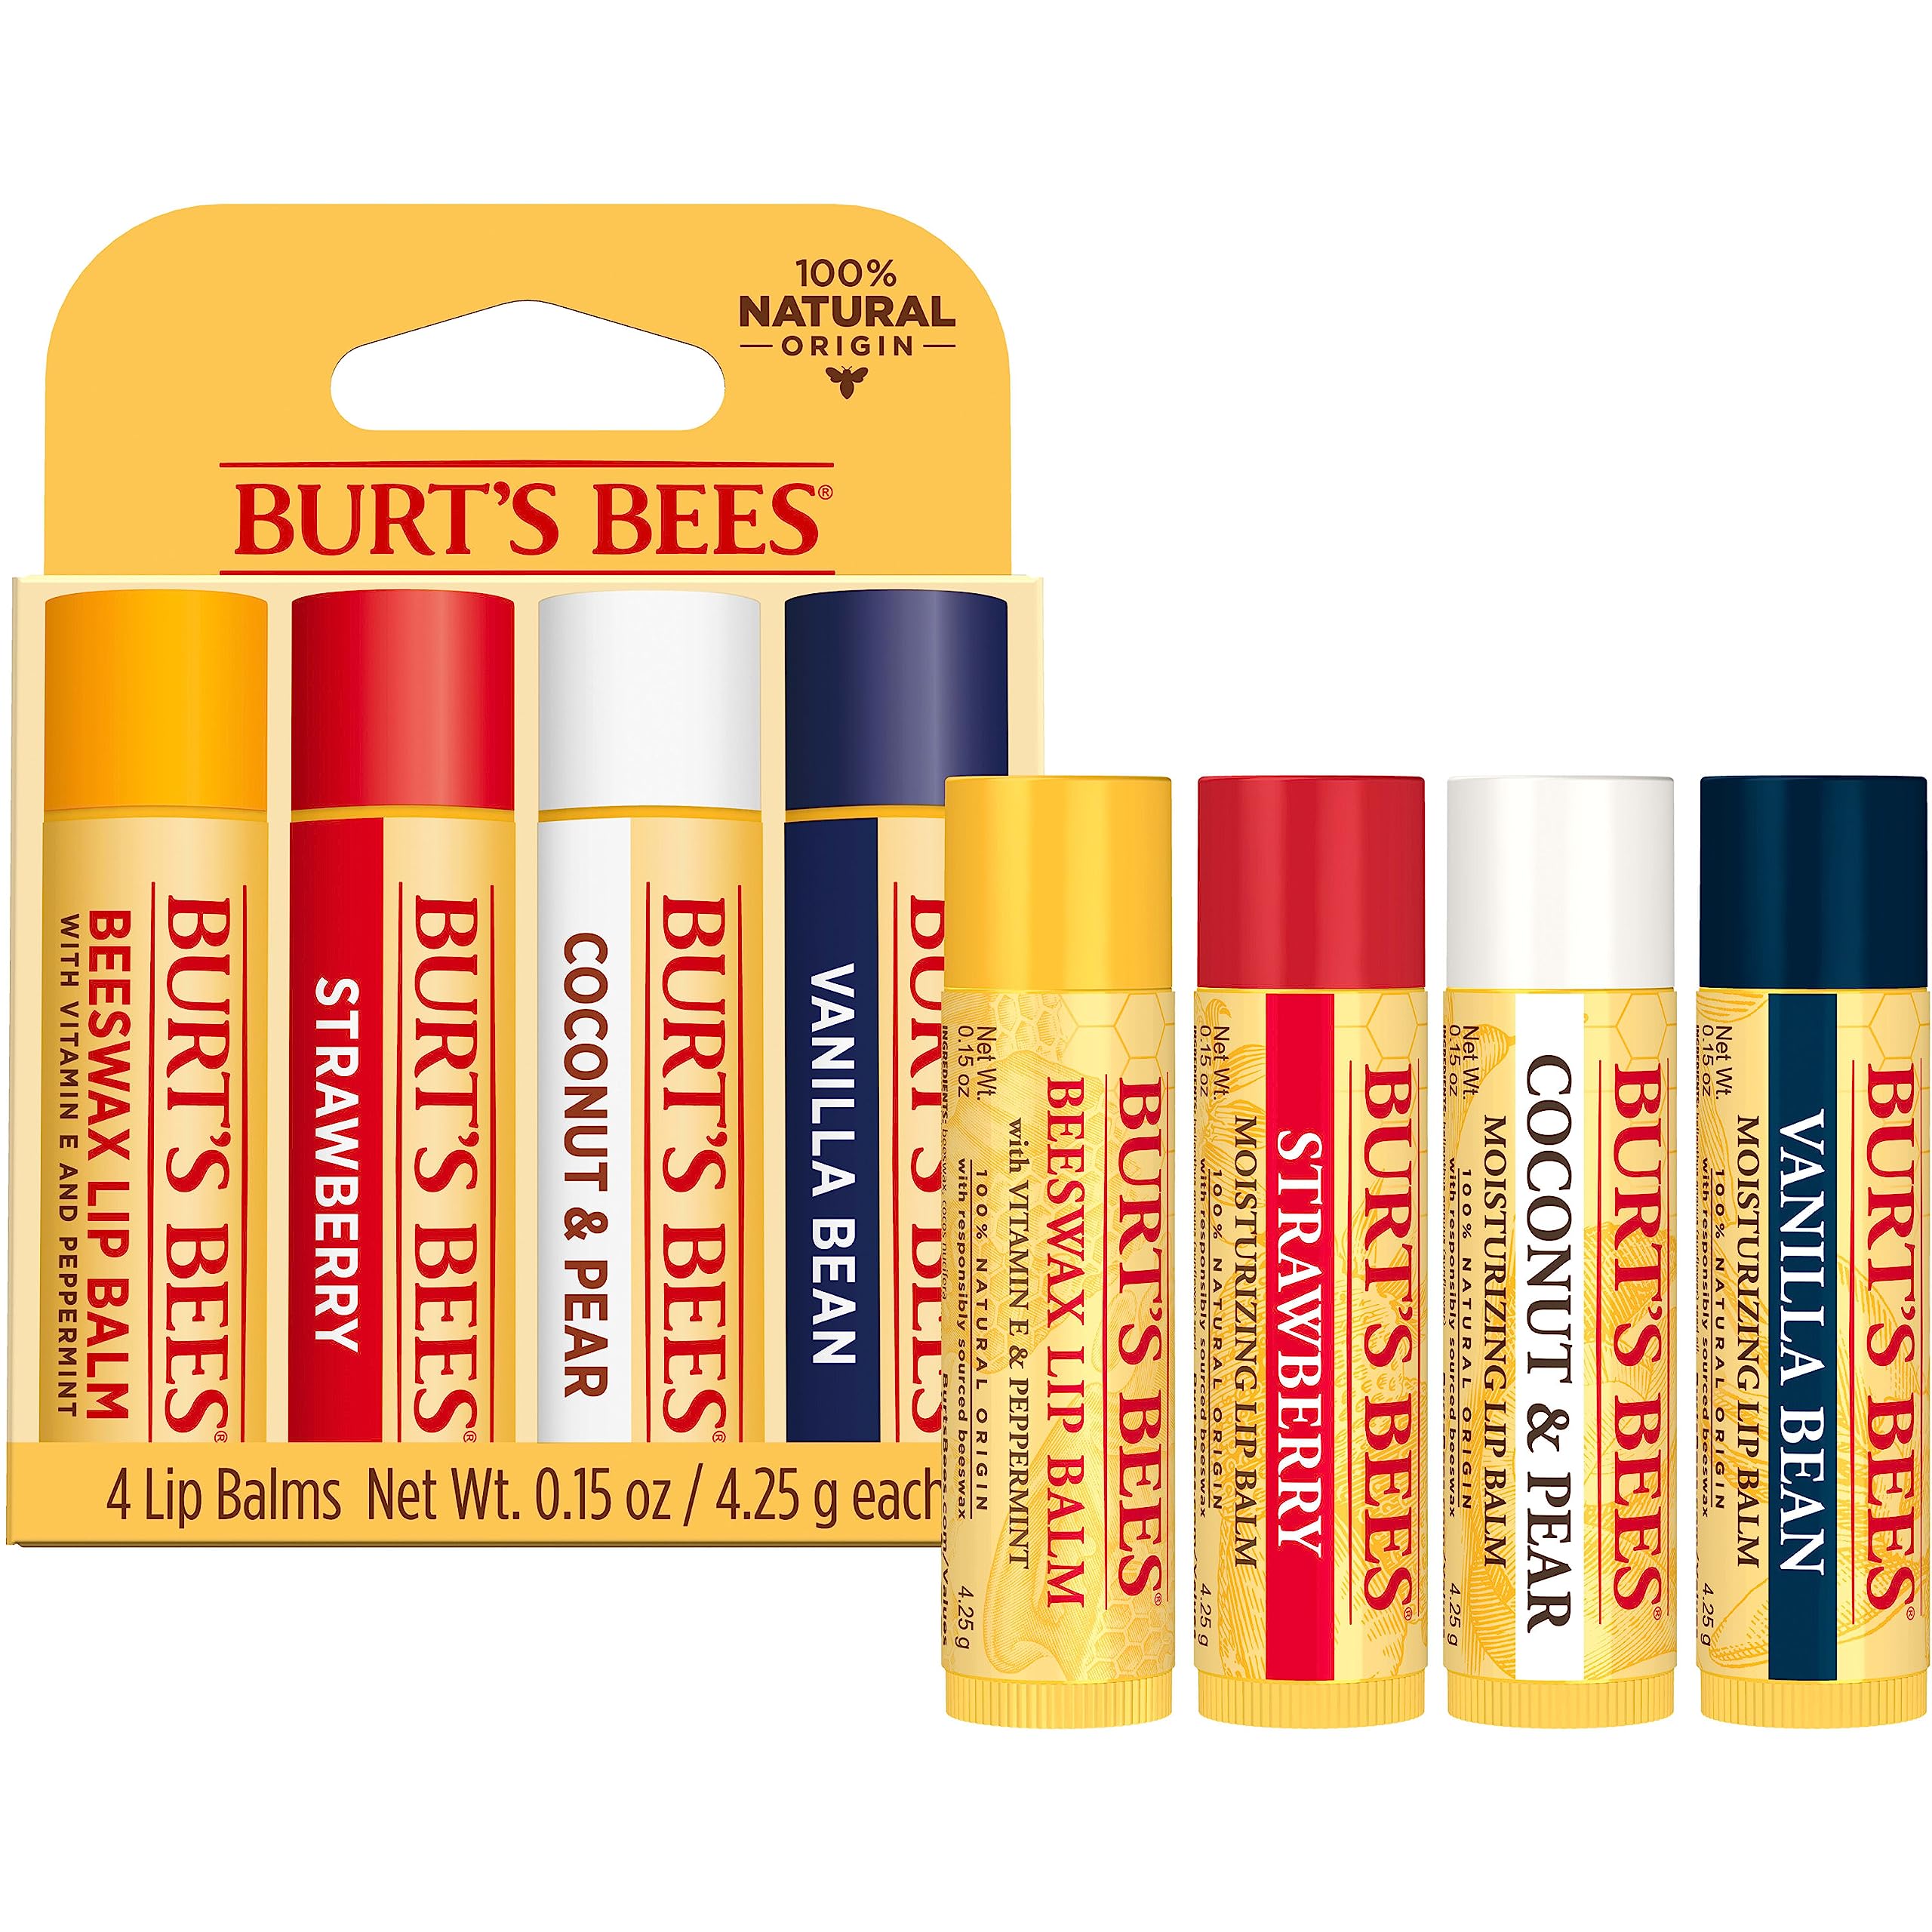 Burt's Bees Lip Balm, Moisturizing Lip Care, for All Day Hydration, 100% Natural, Original Beeswax, Strawberry, Coconut & Pear & Vanilla (4 Pack)